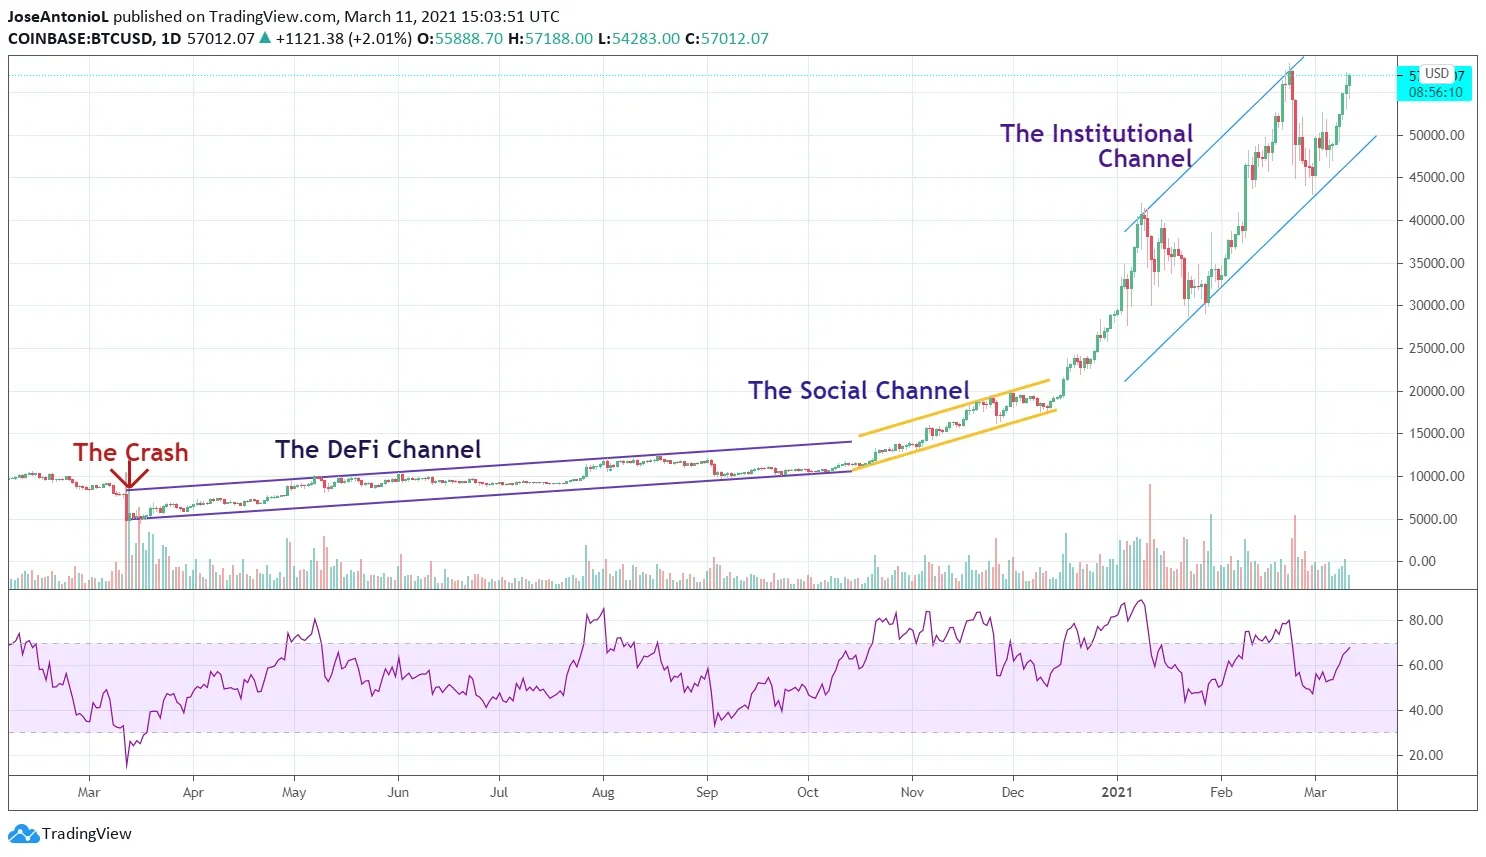 Chart with the price of Bitcoin during The Institutional Channel